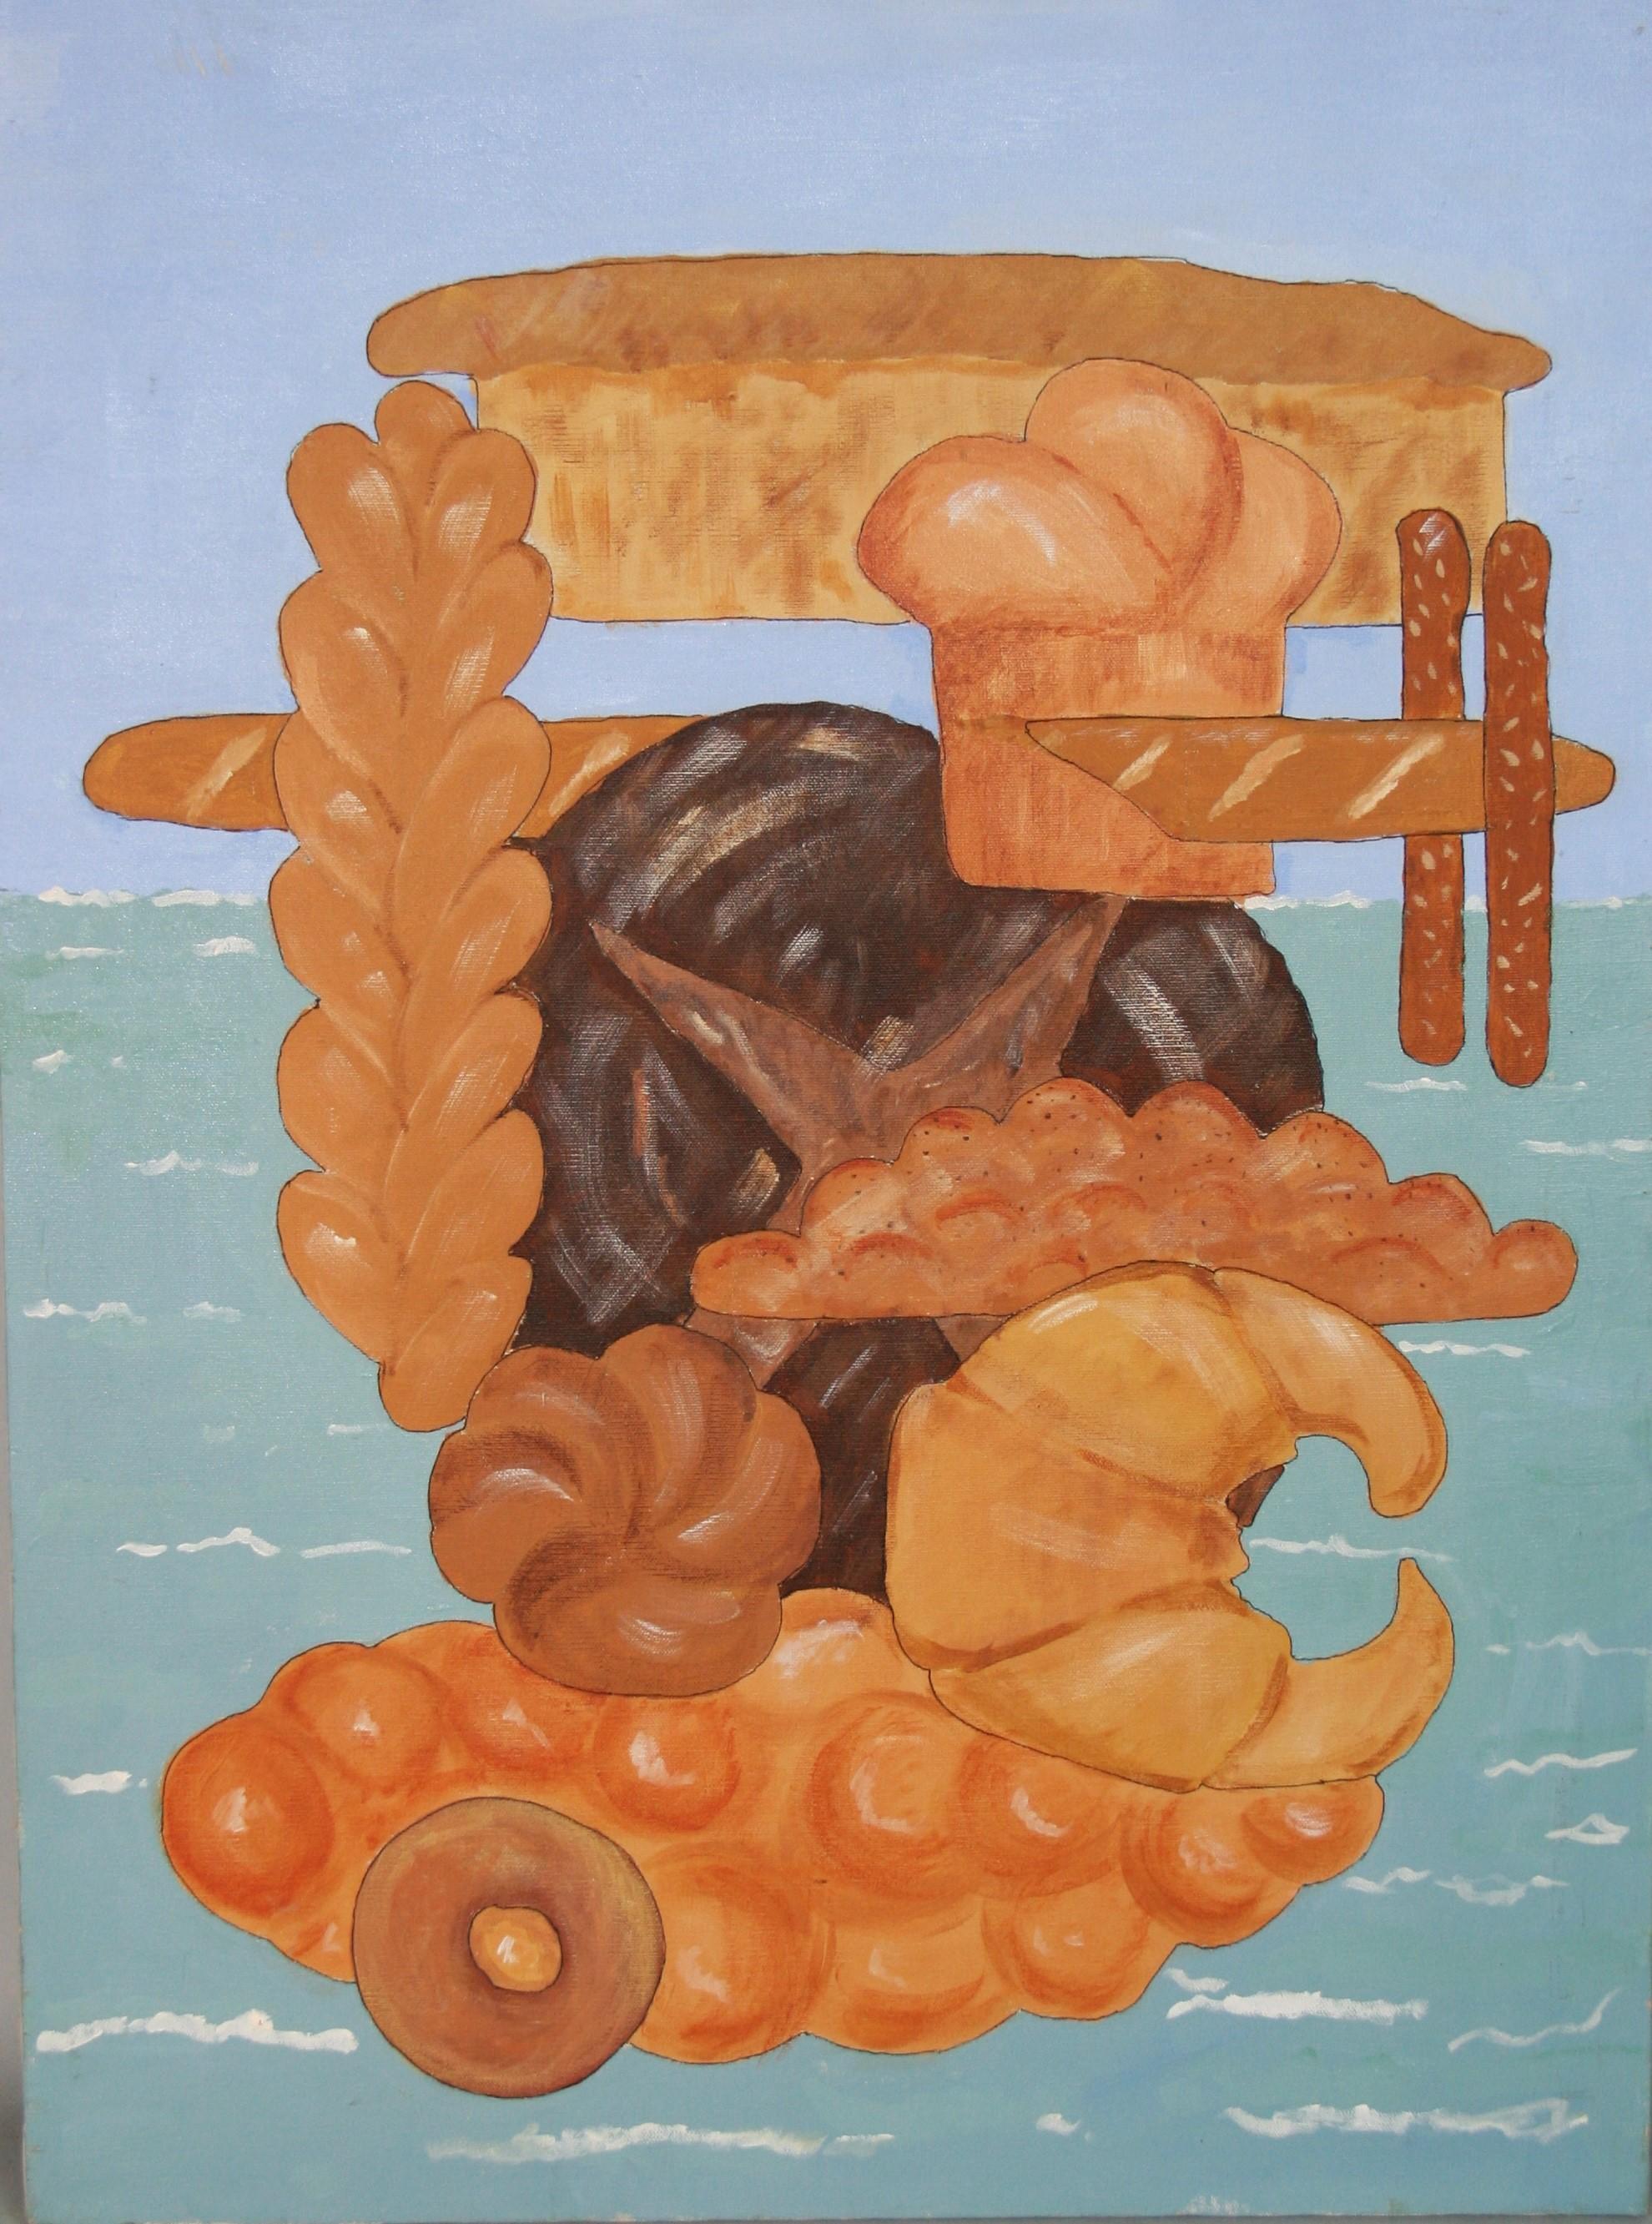 Unknown Abstract Painting – Amerikanisches surreales Vintage-Skulptur-Gemälde „Bread upon The Waters“, Acryl auf Leinwand